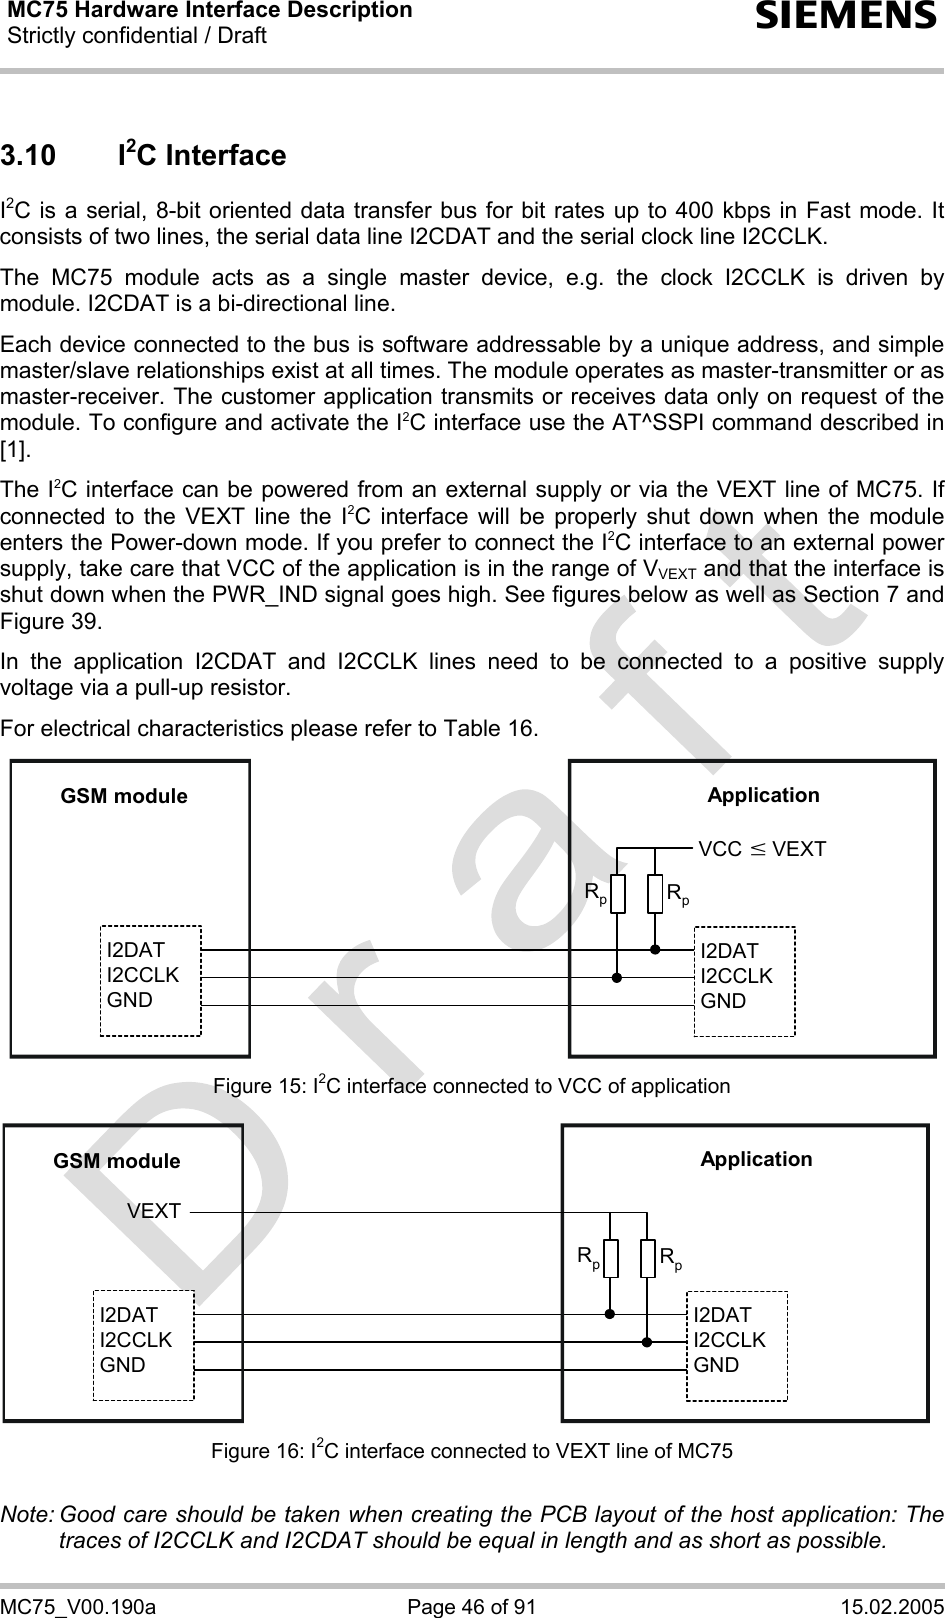 MC75 Hardware Interface Description Strictly confidential / Draft  s MC75_V00.190a  Page 46 of 91  15.02.2005 3.10 I2C Interface I2C is a serial, 8-bit oriented data transfer bus for bit rates up to 400 kbps in Fast mode. It consists of two lines, the serial data line I2CDAT and the serial clock line I2CCLK.   The MC75 module acts as a single master device, e.g. the clock I2CCLK is driven by module. I2CDAT is a bi-directional line.  Each device connected to the bus is software addressable by a unique address, and simple master/slave relationships exist at all times. The module operates as master-transmitter or as master-receiver. The customer application transmits or receives data only on request of the module. To configure and activate the I2C interface use the AT^SSPI command described in [1].  The I2C interface can be powered from an external supply or via the VEXT line of MC75. If connected to the VEXT line the I2C interface will be properly shut down when the module enters the Power-down mode. If you prefer to connect the I2C interface to an external power supply, take care that VCC of the application is in the range of VVEXT and that the interface is shut down when the PWR_IND signal goes high. See figures below as well as Section 7 and Figure 39.  In the application I2CDAT and I2CCLK lines need to be connected to a positive supply voltage via a pull-up resistor.   For electrical characteristics please refer to Table 16.  GSM moduleI2DATI2CCLKGNDI2DATI2CCLKGNDApplicationVCCRpRpwVEXT Figure 15: I2C interface connected to VCC of application  GSM moduleI2DATI2CCLKGNDI2DATI2CCLKGNDApplicationVEXTRpRp Figure 16: I2C interface connected to VEXT line of MC75  Note: Good care should be taken when creating the PCB layout of the host application: The traces of I2CCLK and I2CDAT should be equal in length and as short as possible.  